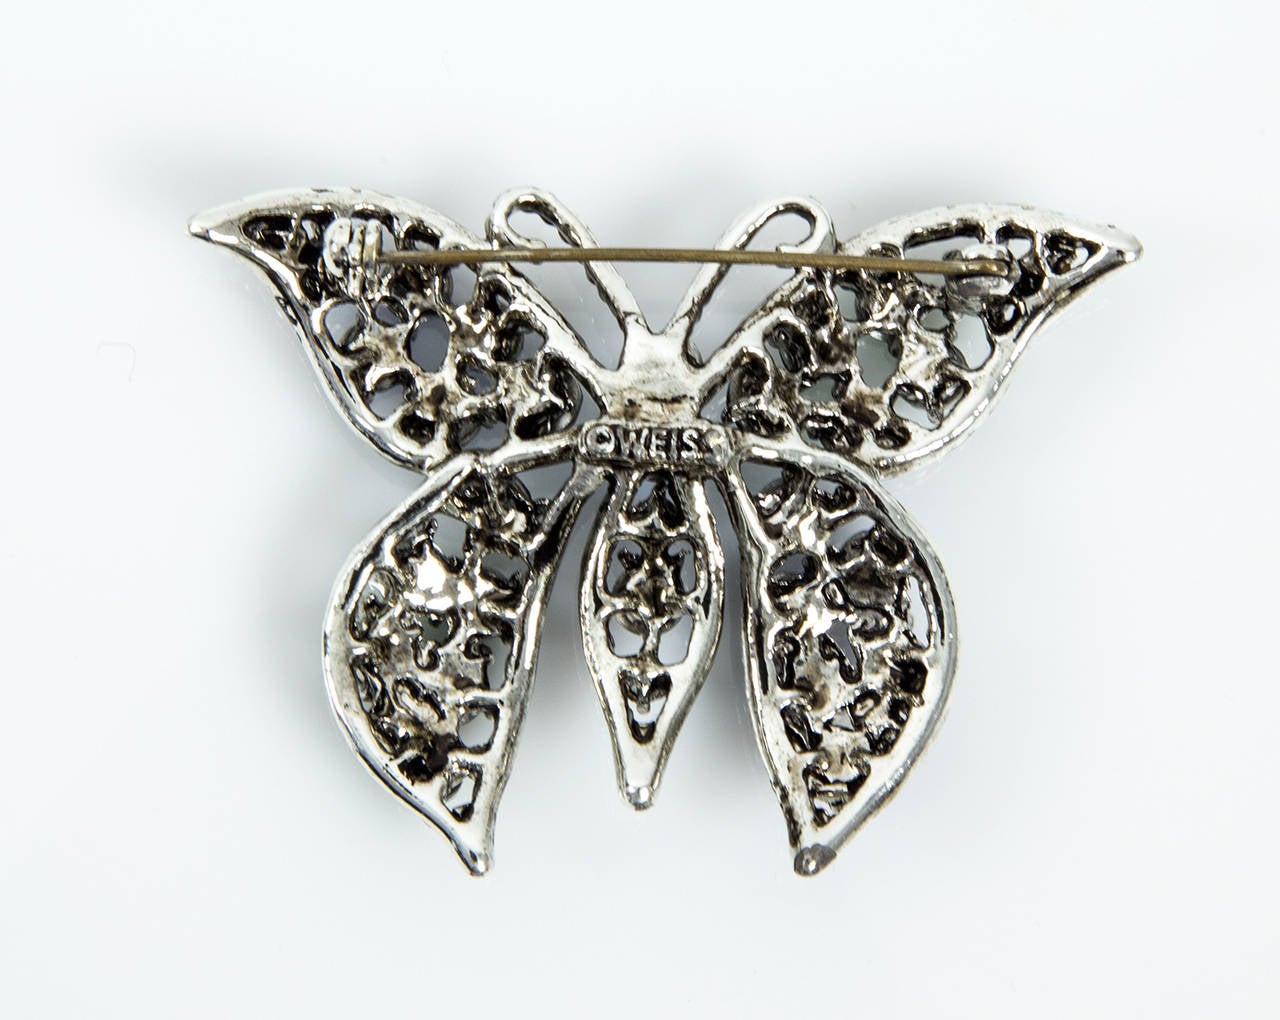 Beautiful and colorful Blue and Green Rhinestone Butterfly Brooch;  signed WEISS. Approx. size: 2.25” x 1.5”.